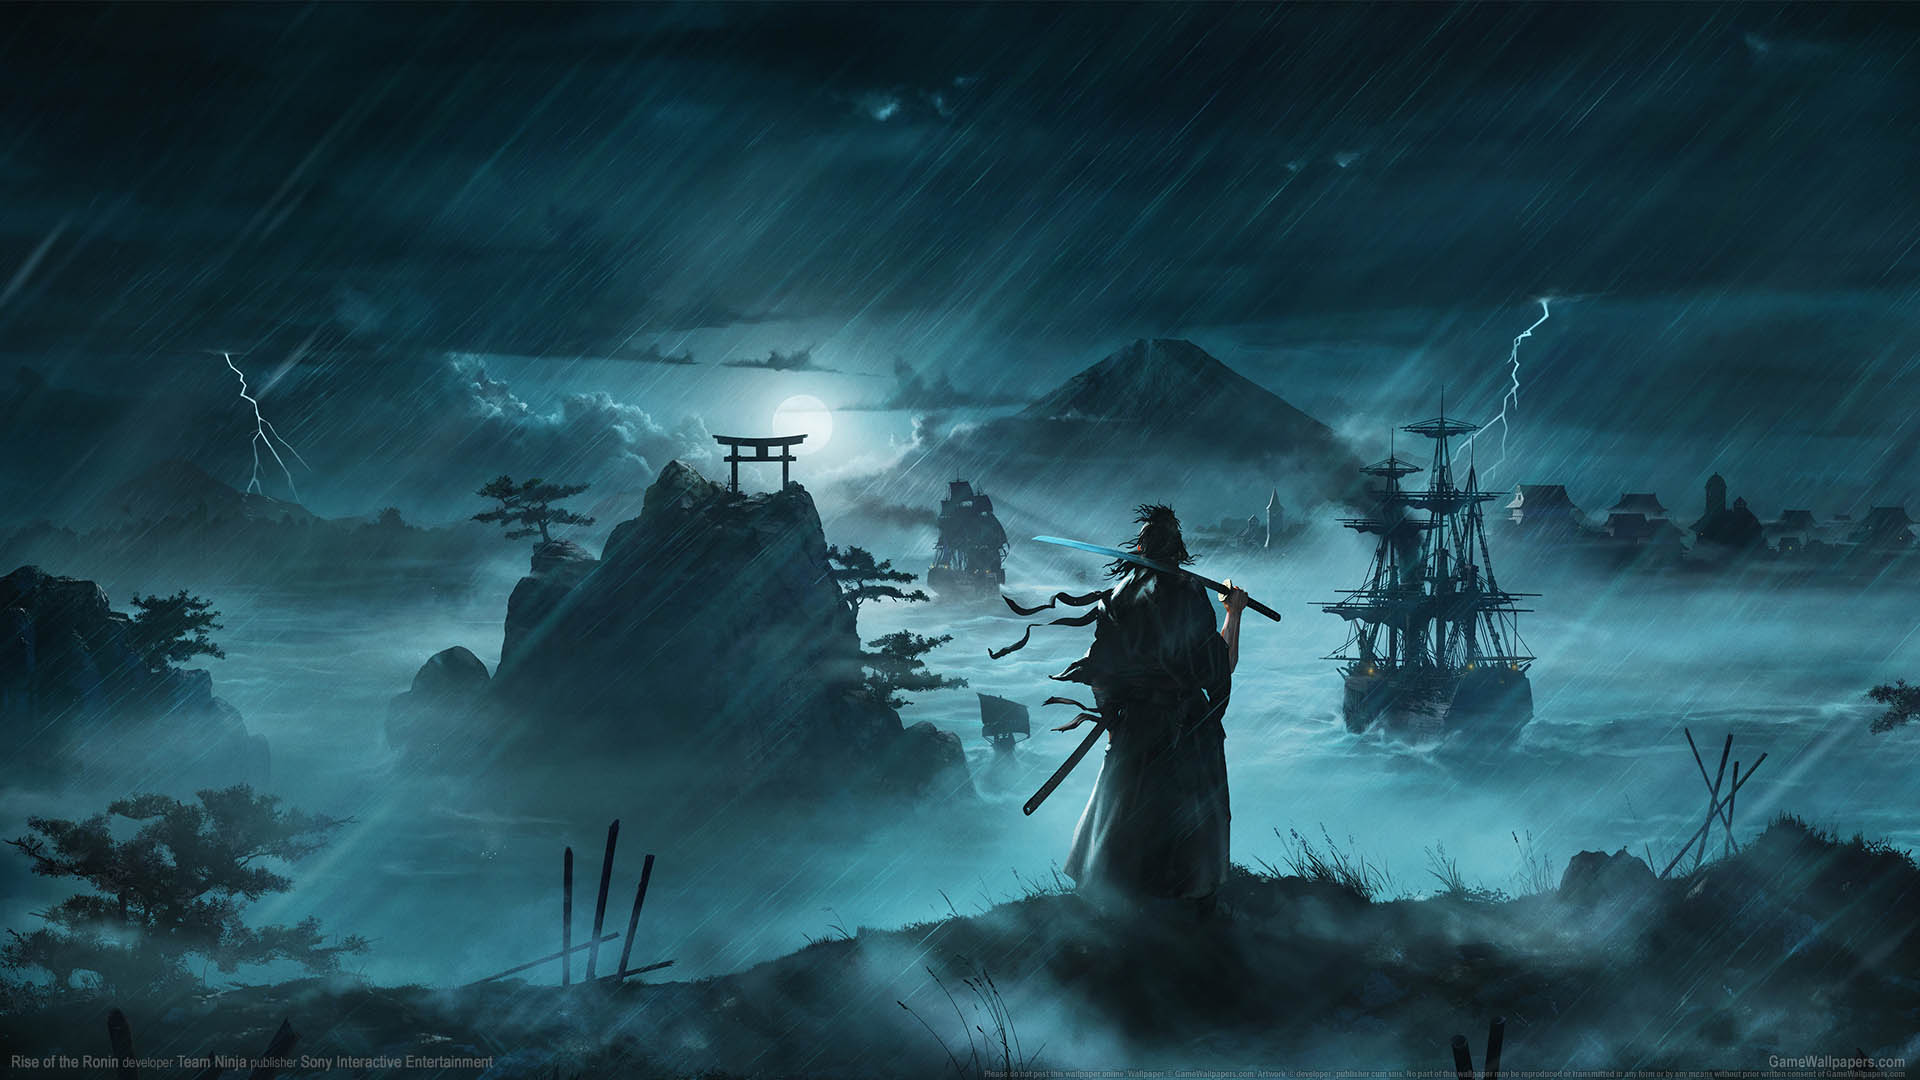 Rise of the Ronin wallpaper 01 1920x1080